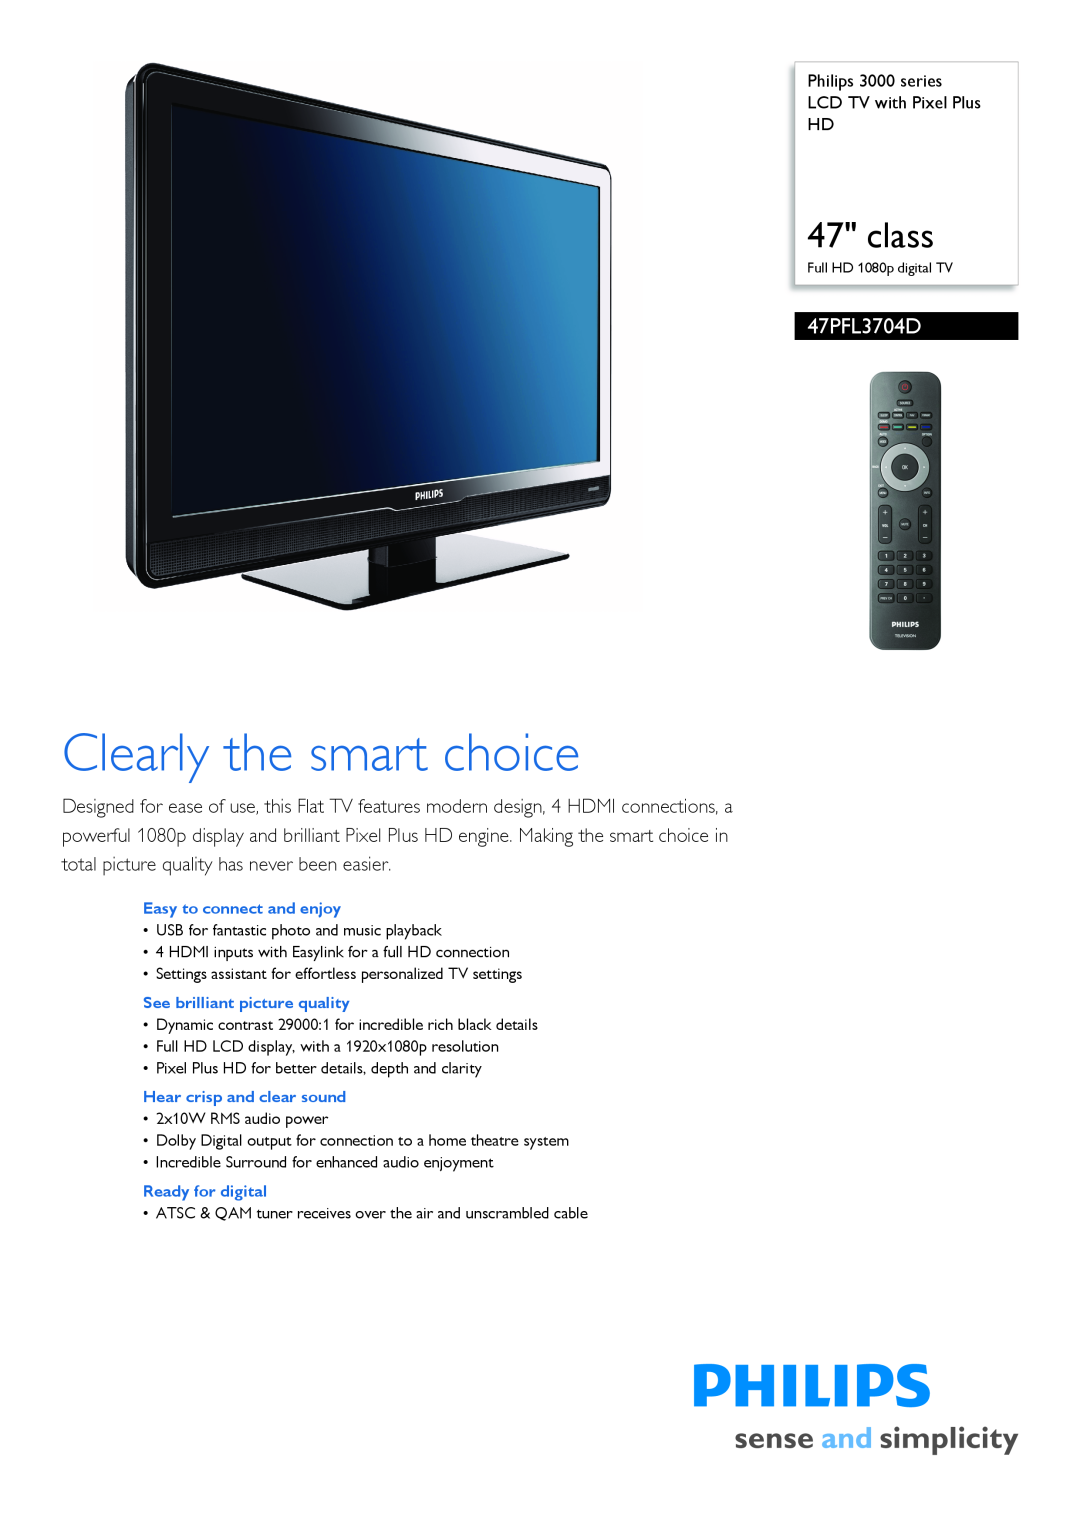 Philips 47PFL3704D/F7 manual Philips 3000 series LCD TV with Pixel Plus HD, Clearly the smart choice, class 